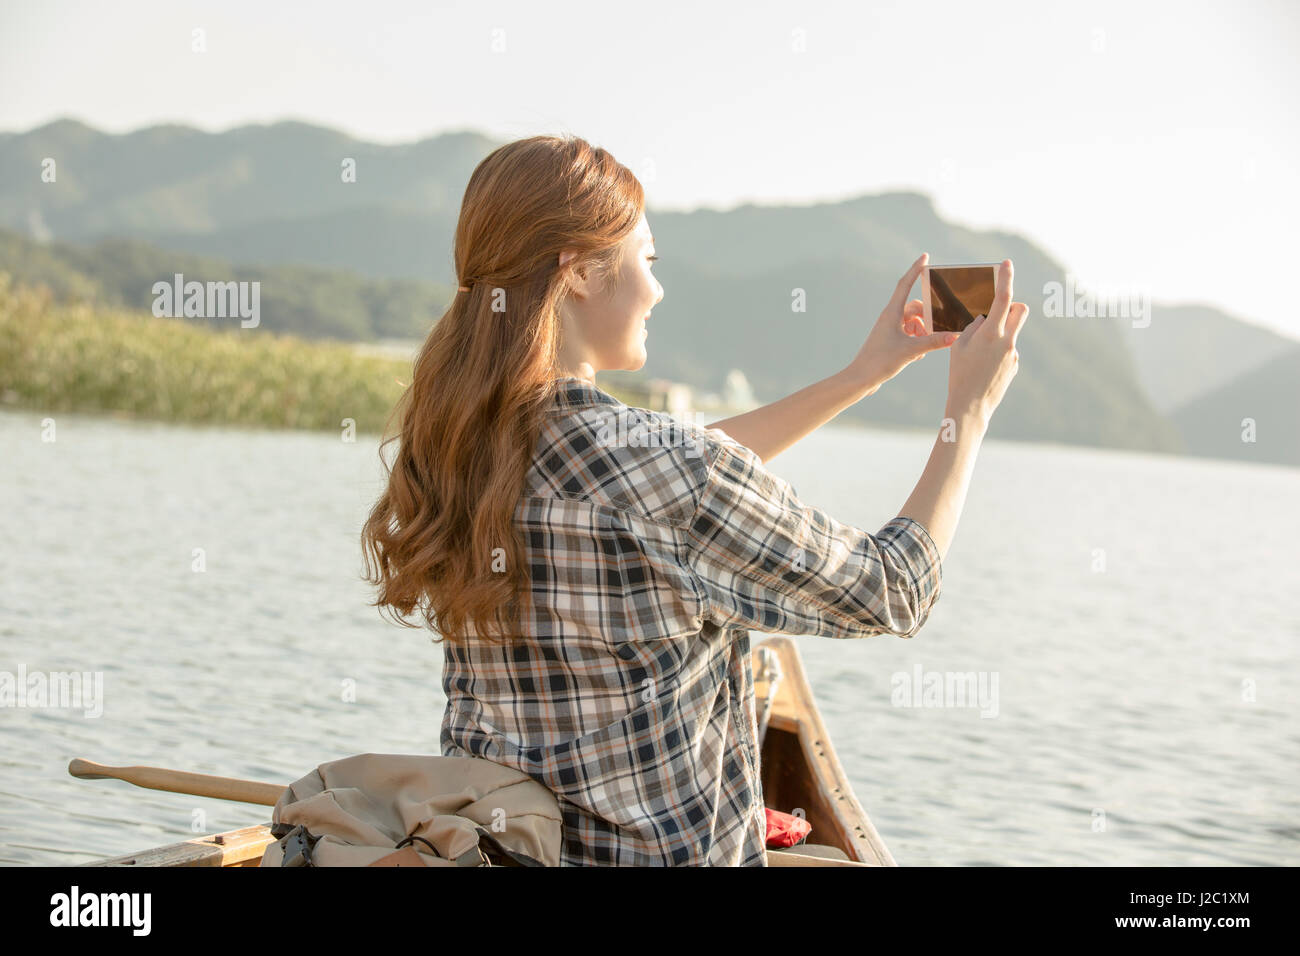 Young female traveler taking pictures Stock Photo